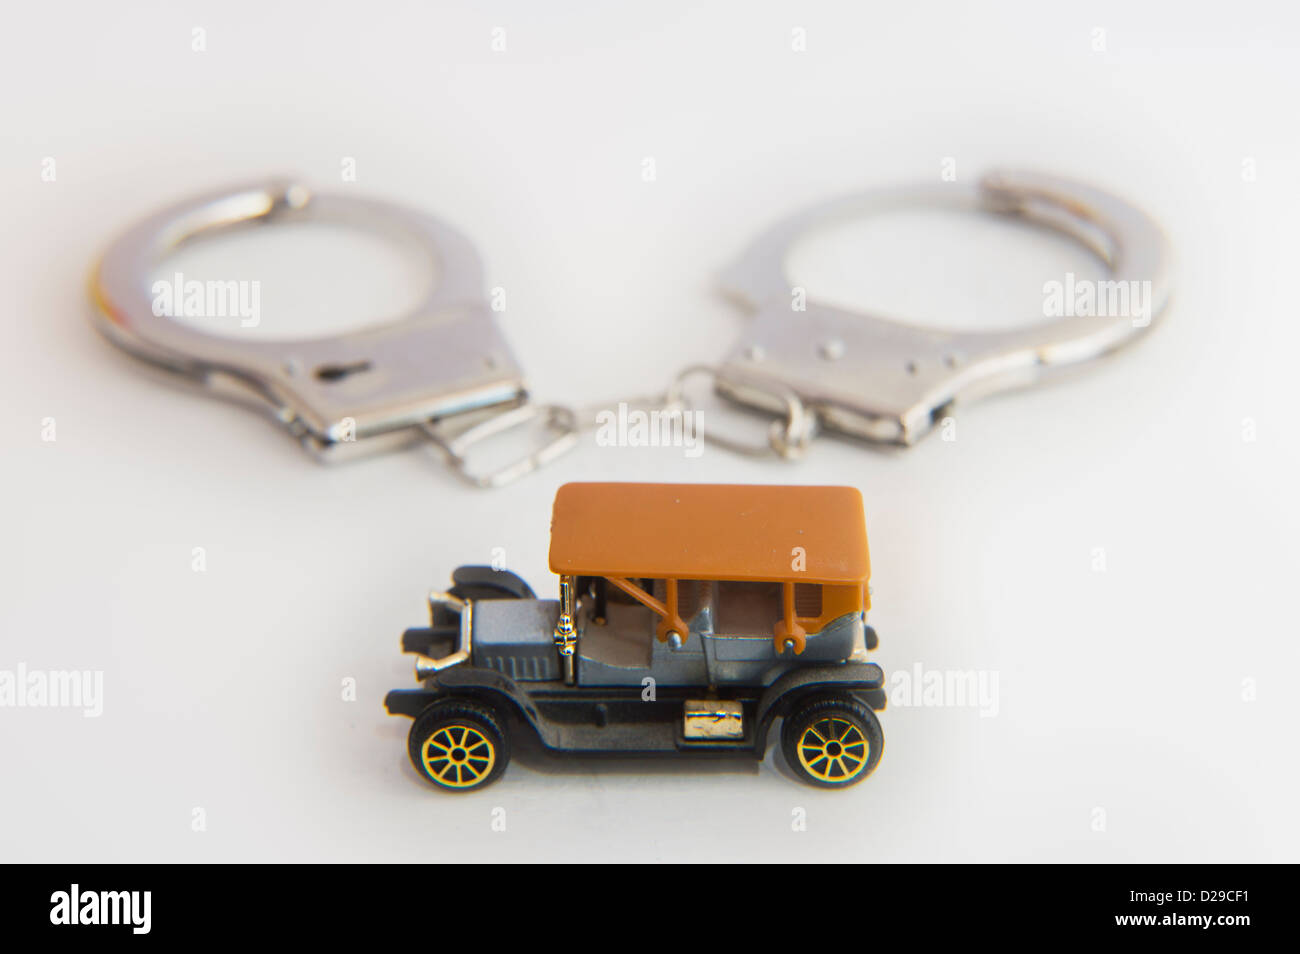 Concept image, old car, expense, motoring, handcuffs, trapped, ownership, costs Stock Photo